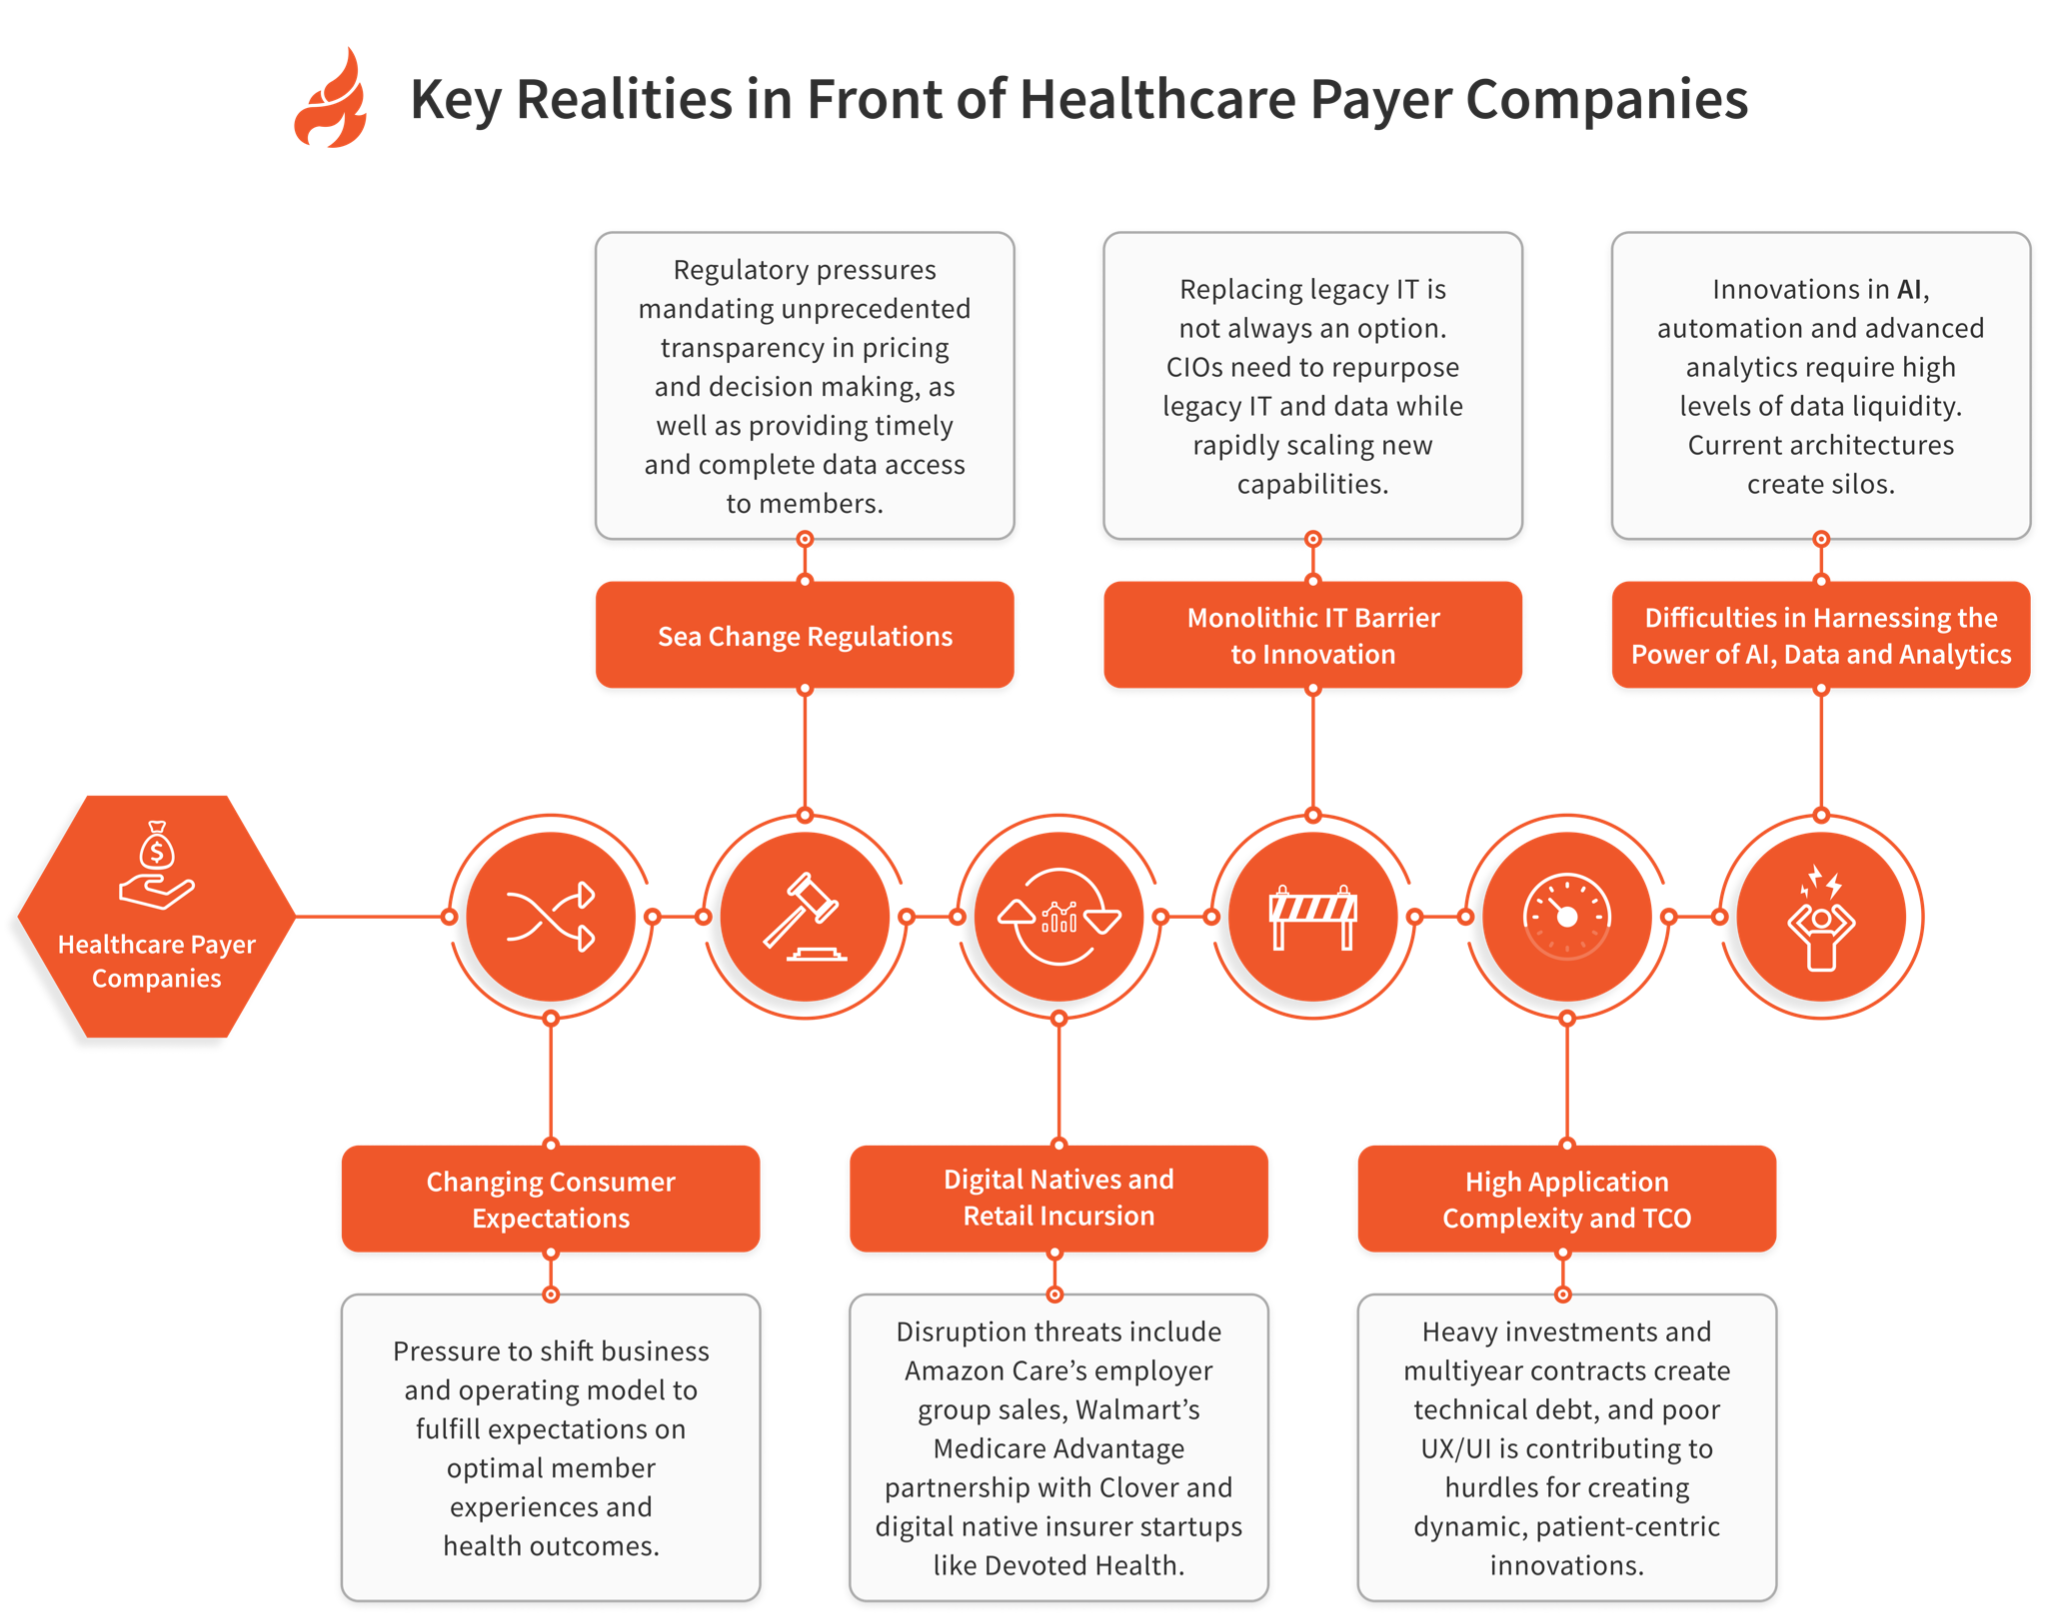 Key Realities in Front of Healthcare Payer companies